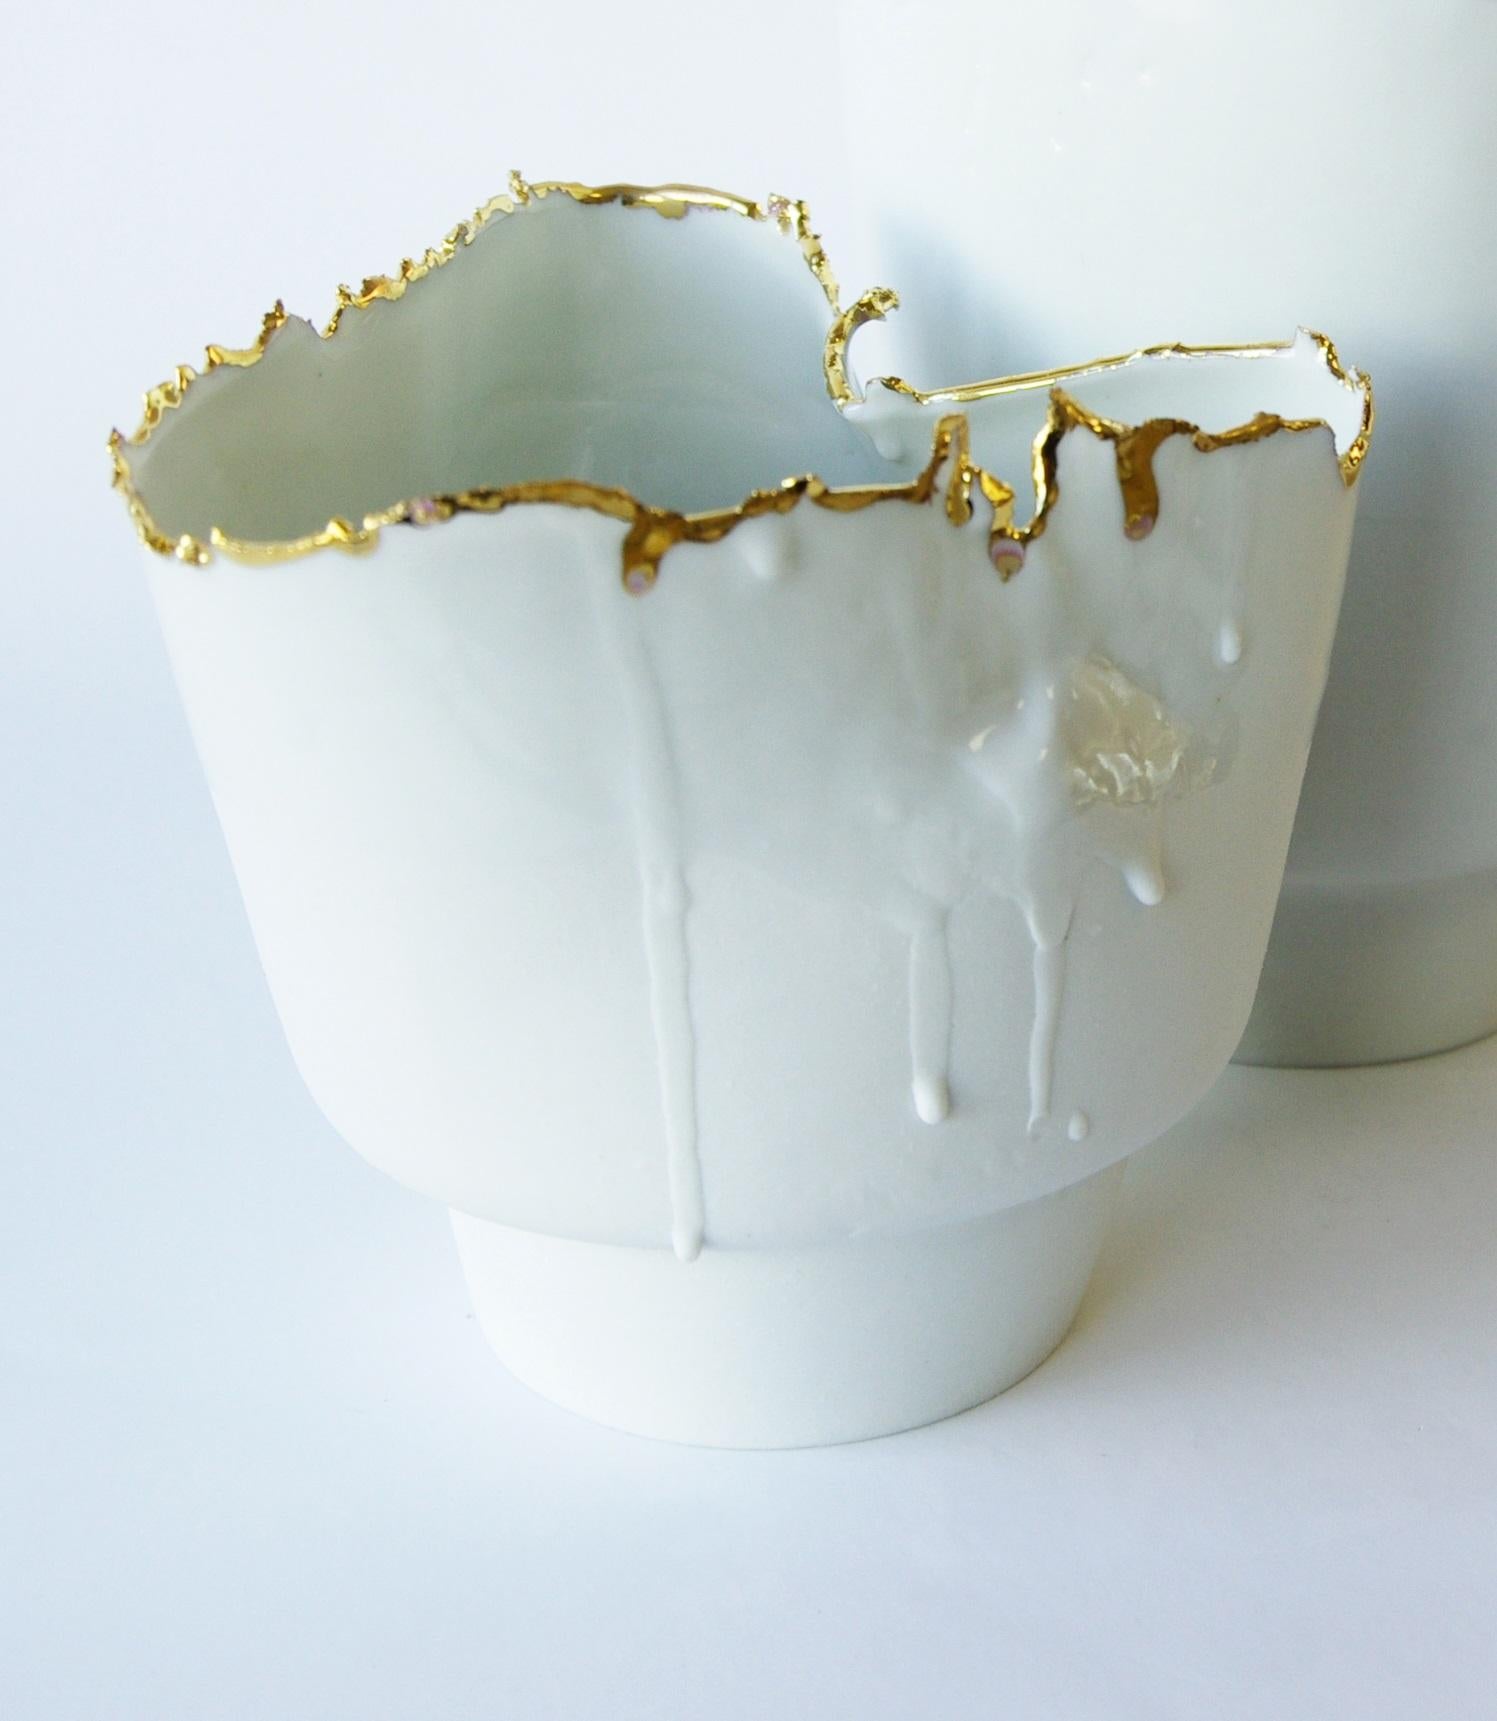 Porcelain and Gold Vase Small Imperfections by Dora Stanczel
One of a Kind.
Dimensions: D 13 x W 13 x H 12 cm.
Materials: Porcelain and gold.

I create bespoke and luxurious porcelain pieces with a careful aesthetic. Beyond the technical mastery of